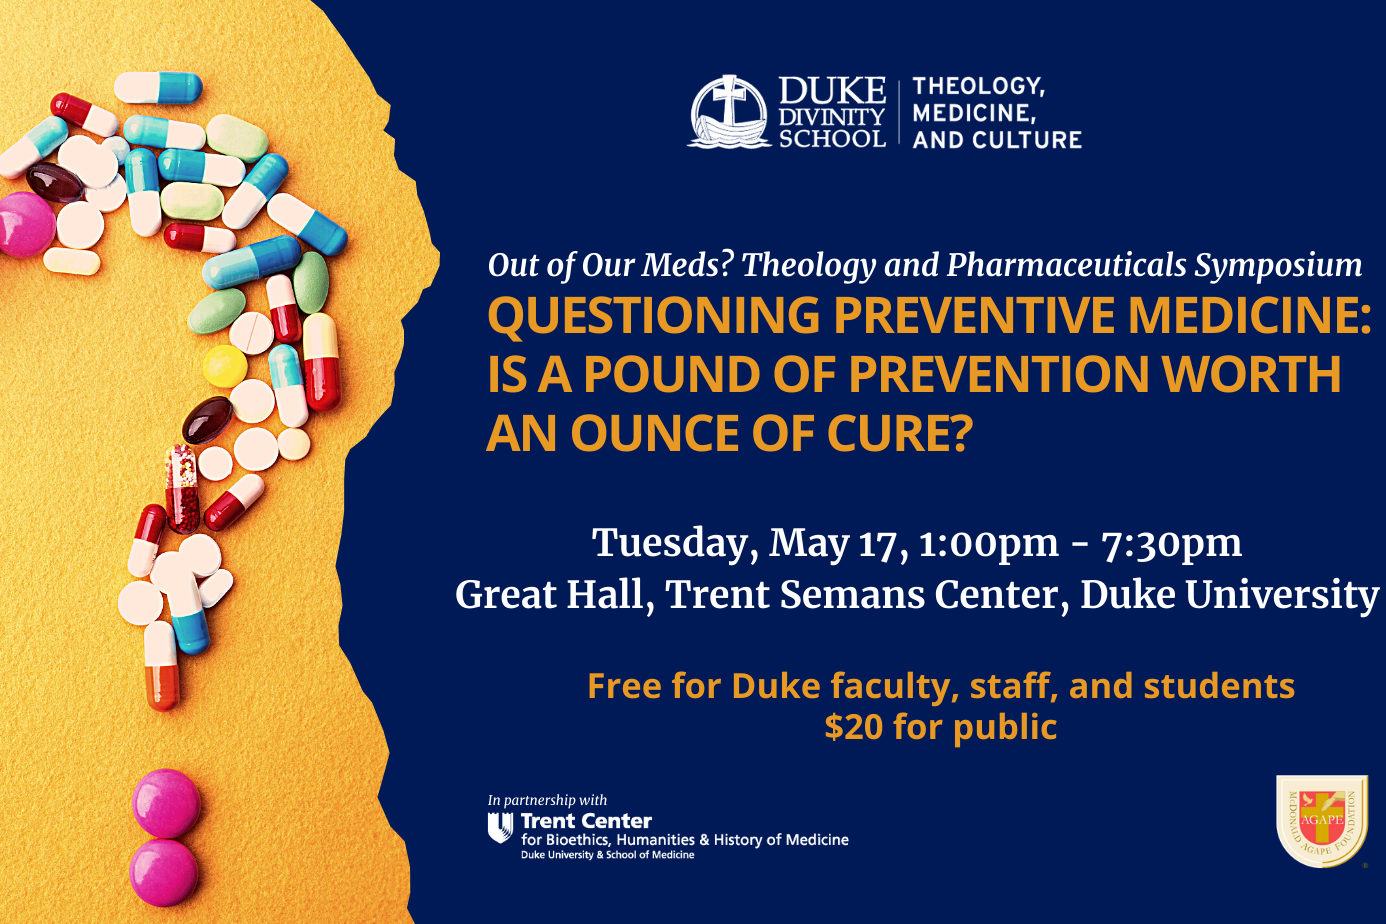 Pills forming a question mark. Headline: QUESTIONING PREVENTIVE MEDICINE: IS A POUND OF PREVENTION WORTH AN OUNCE OF CURE?  Tuesday, May 17, 2022. Free to Duke Faculty, Staff and Students, $20 for the public. Great Hall, Trent Semans Center, Duke University. Duke Theology, Medicine, and Culture logo. Trent Center for Bioethics, Humanities &amp; History of Medicine Logo. McDonald Agape Foundation logo.